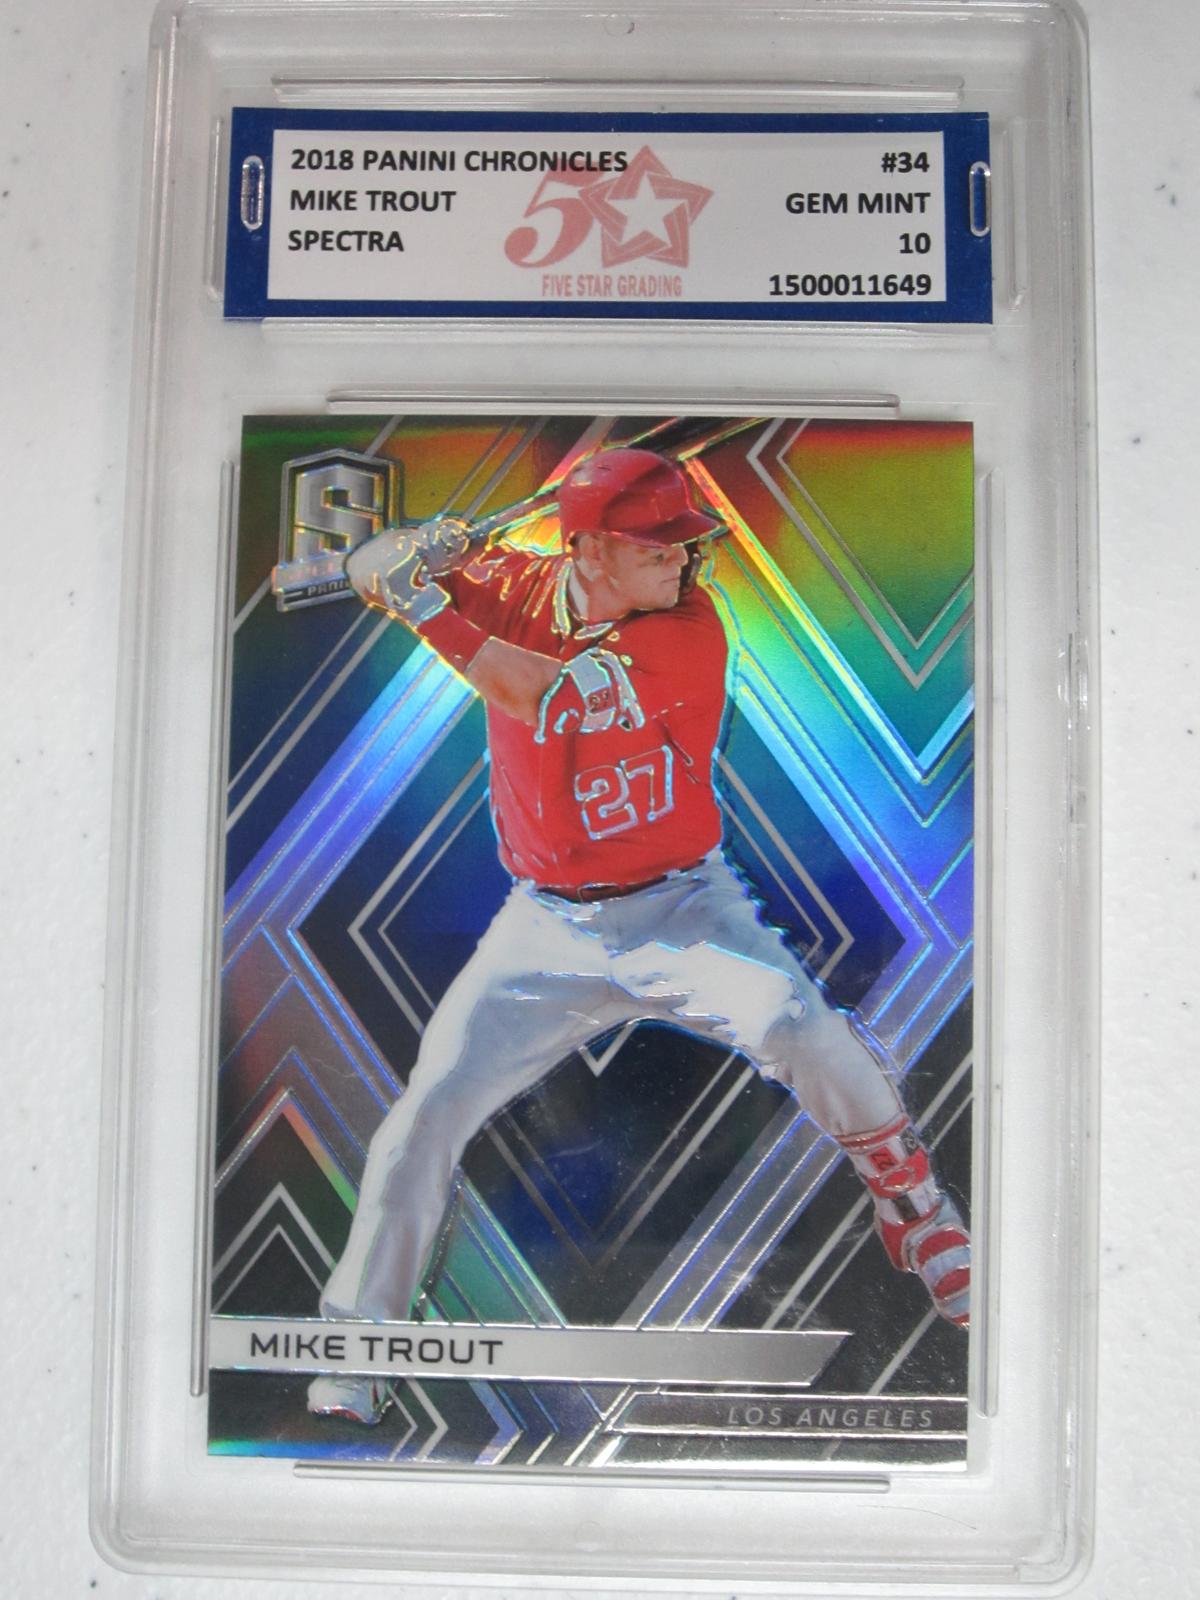 2018 Panini Chronicles Mike Trout Spectra #34 GM MT 10 Five Star Graded